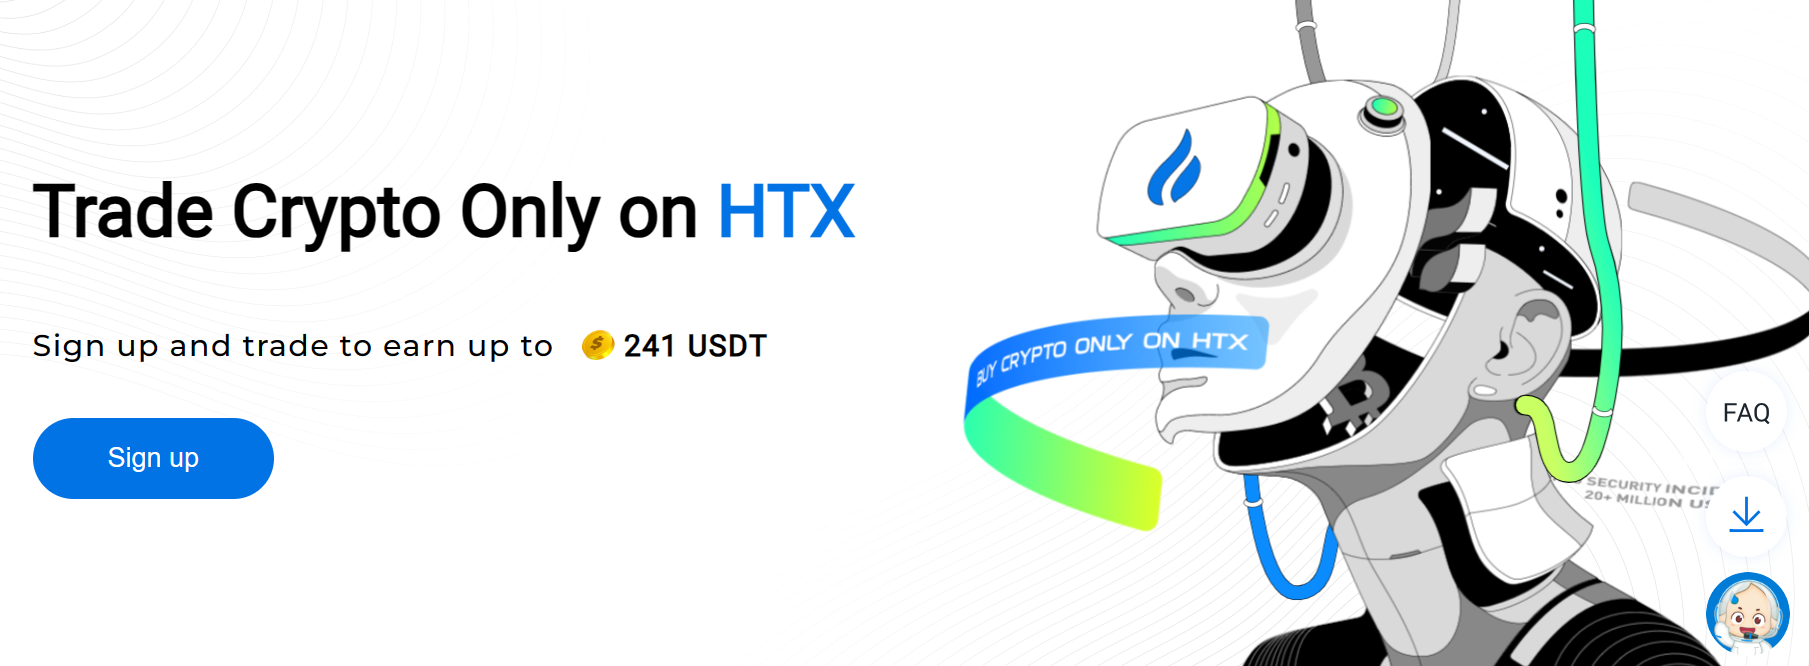 htx exchange how to buy pic coin